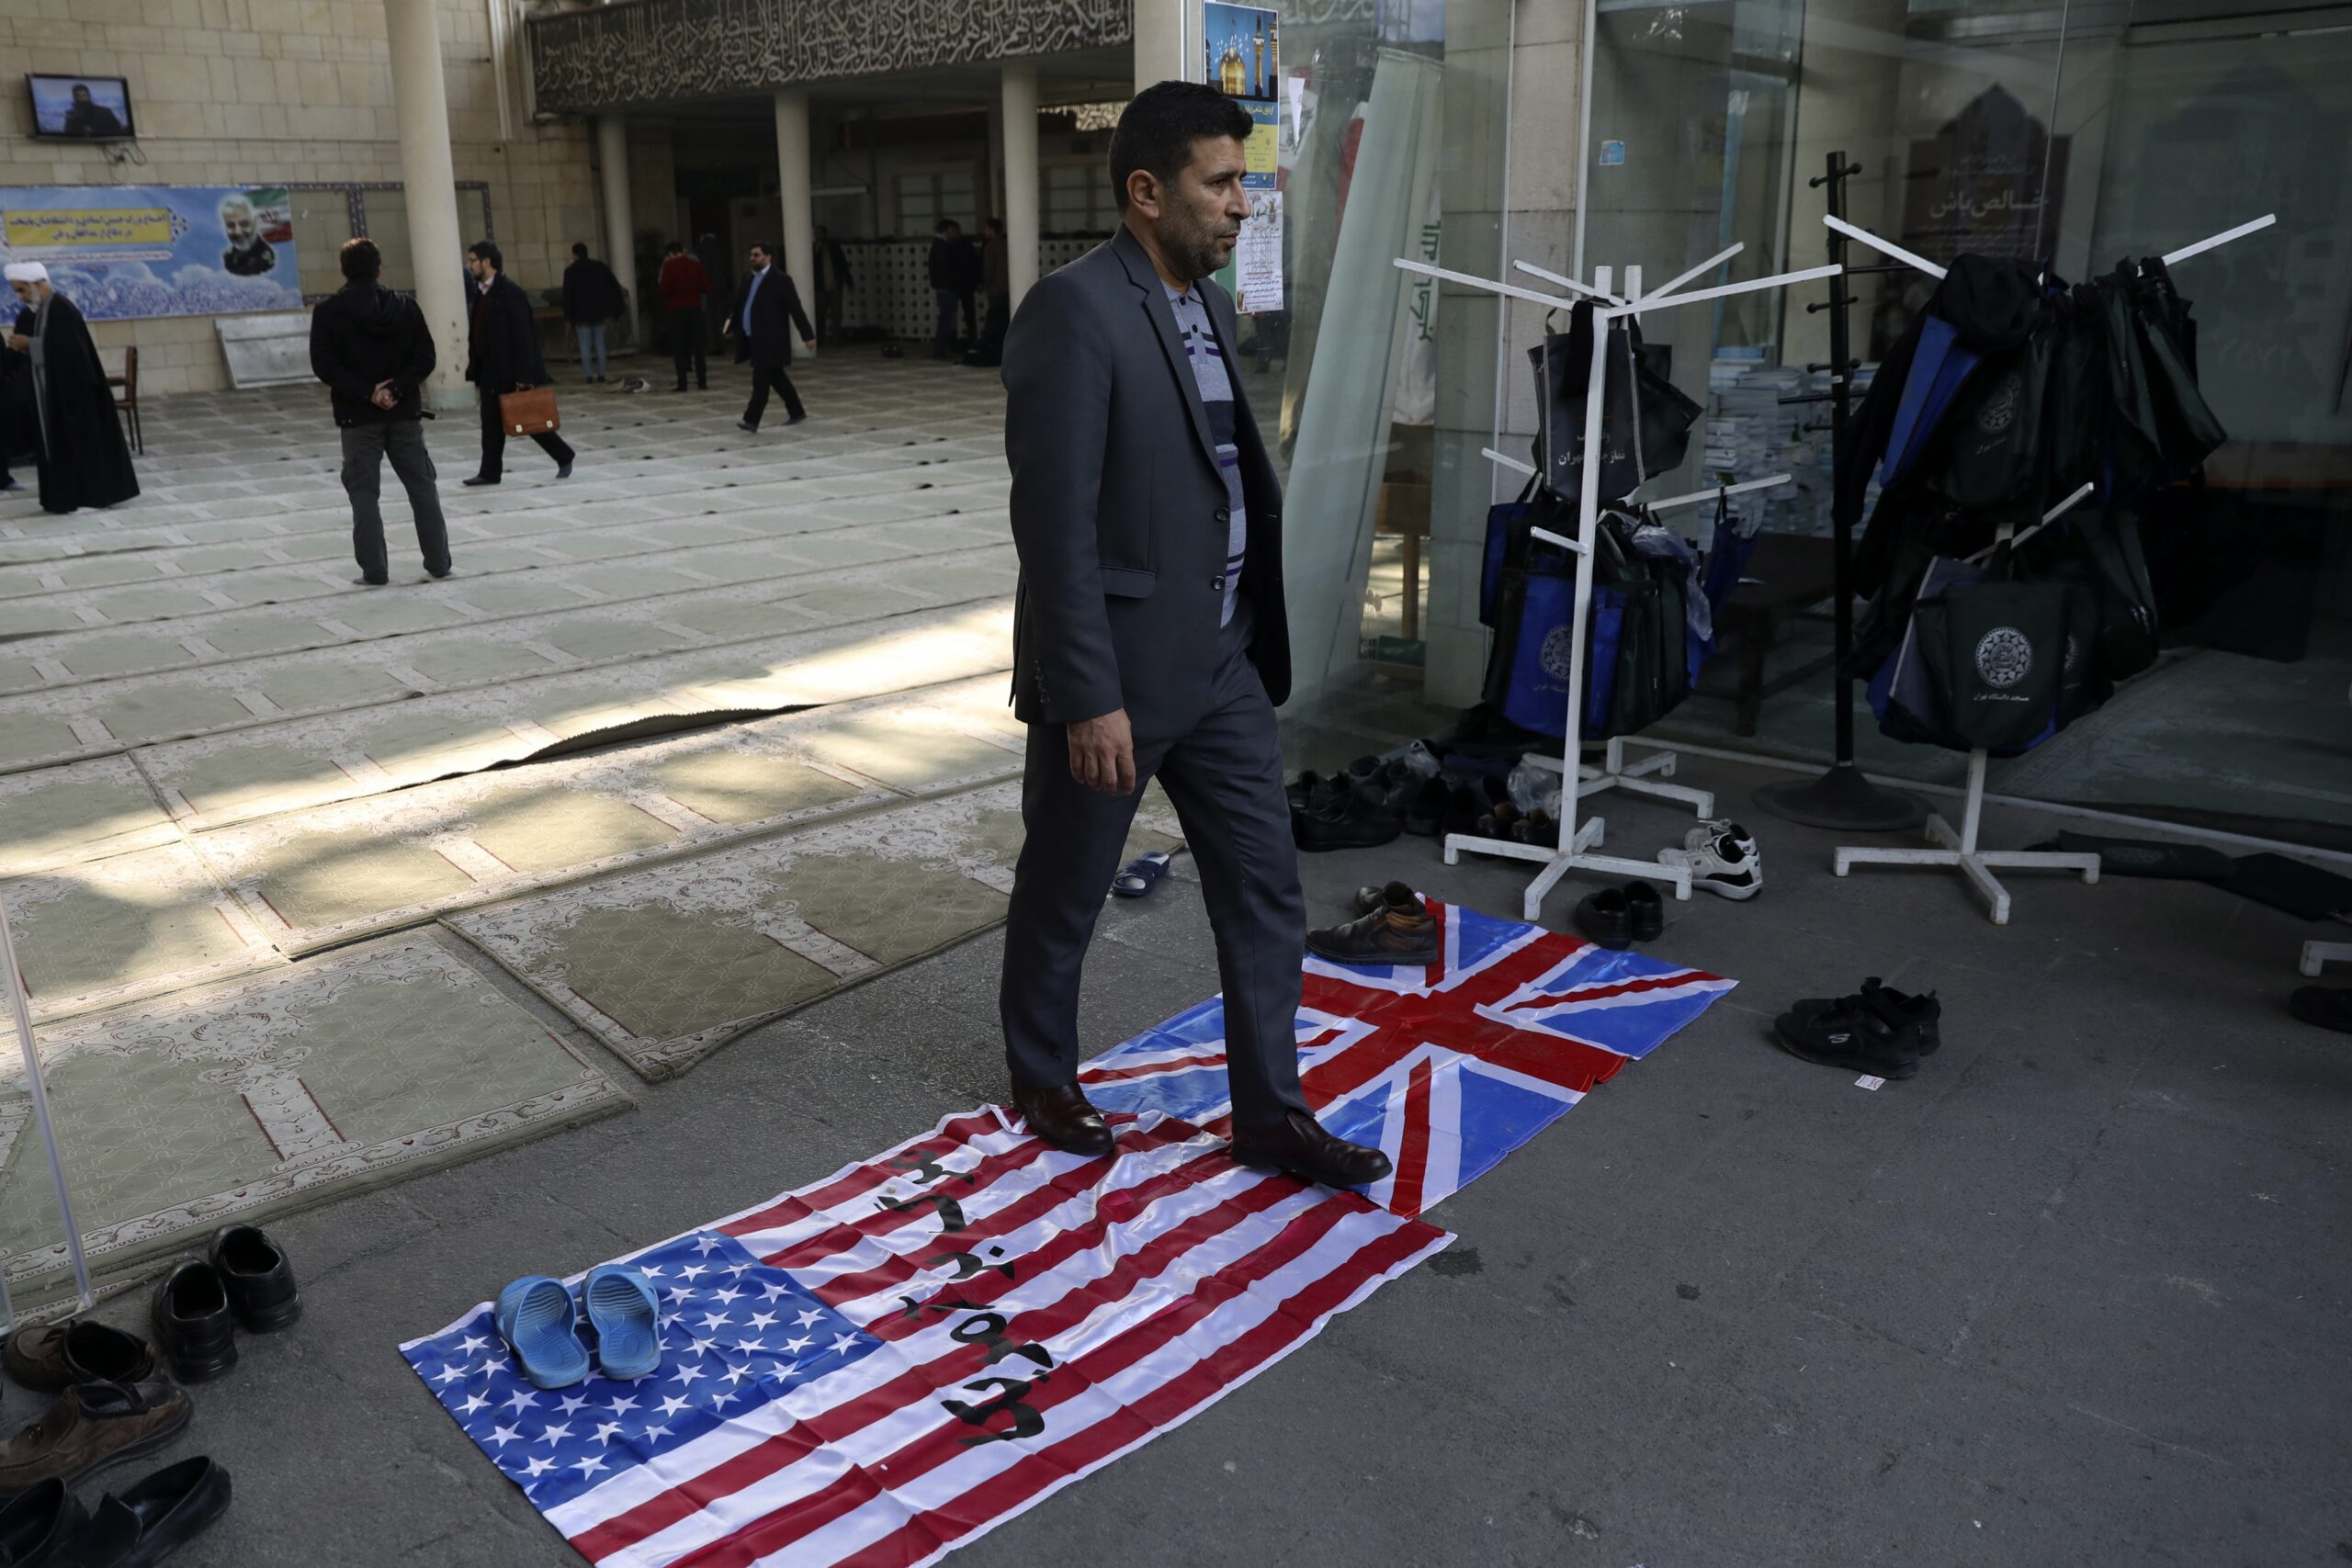 A man walks on U.S. and British flags while leaving a gathering to commemorate the late Iranian Gen. Qassem Soleimani